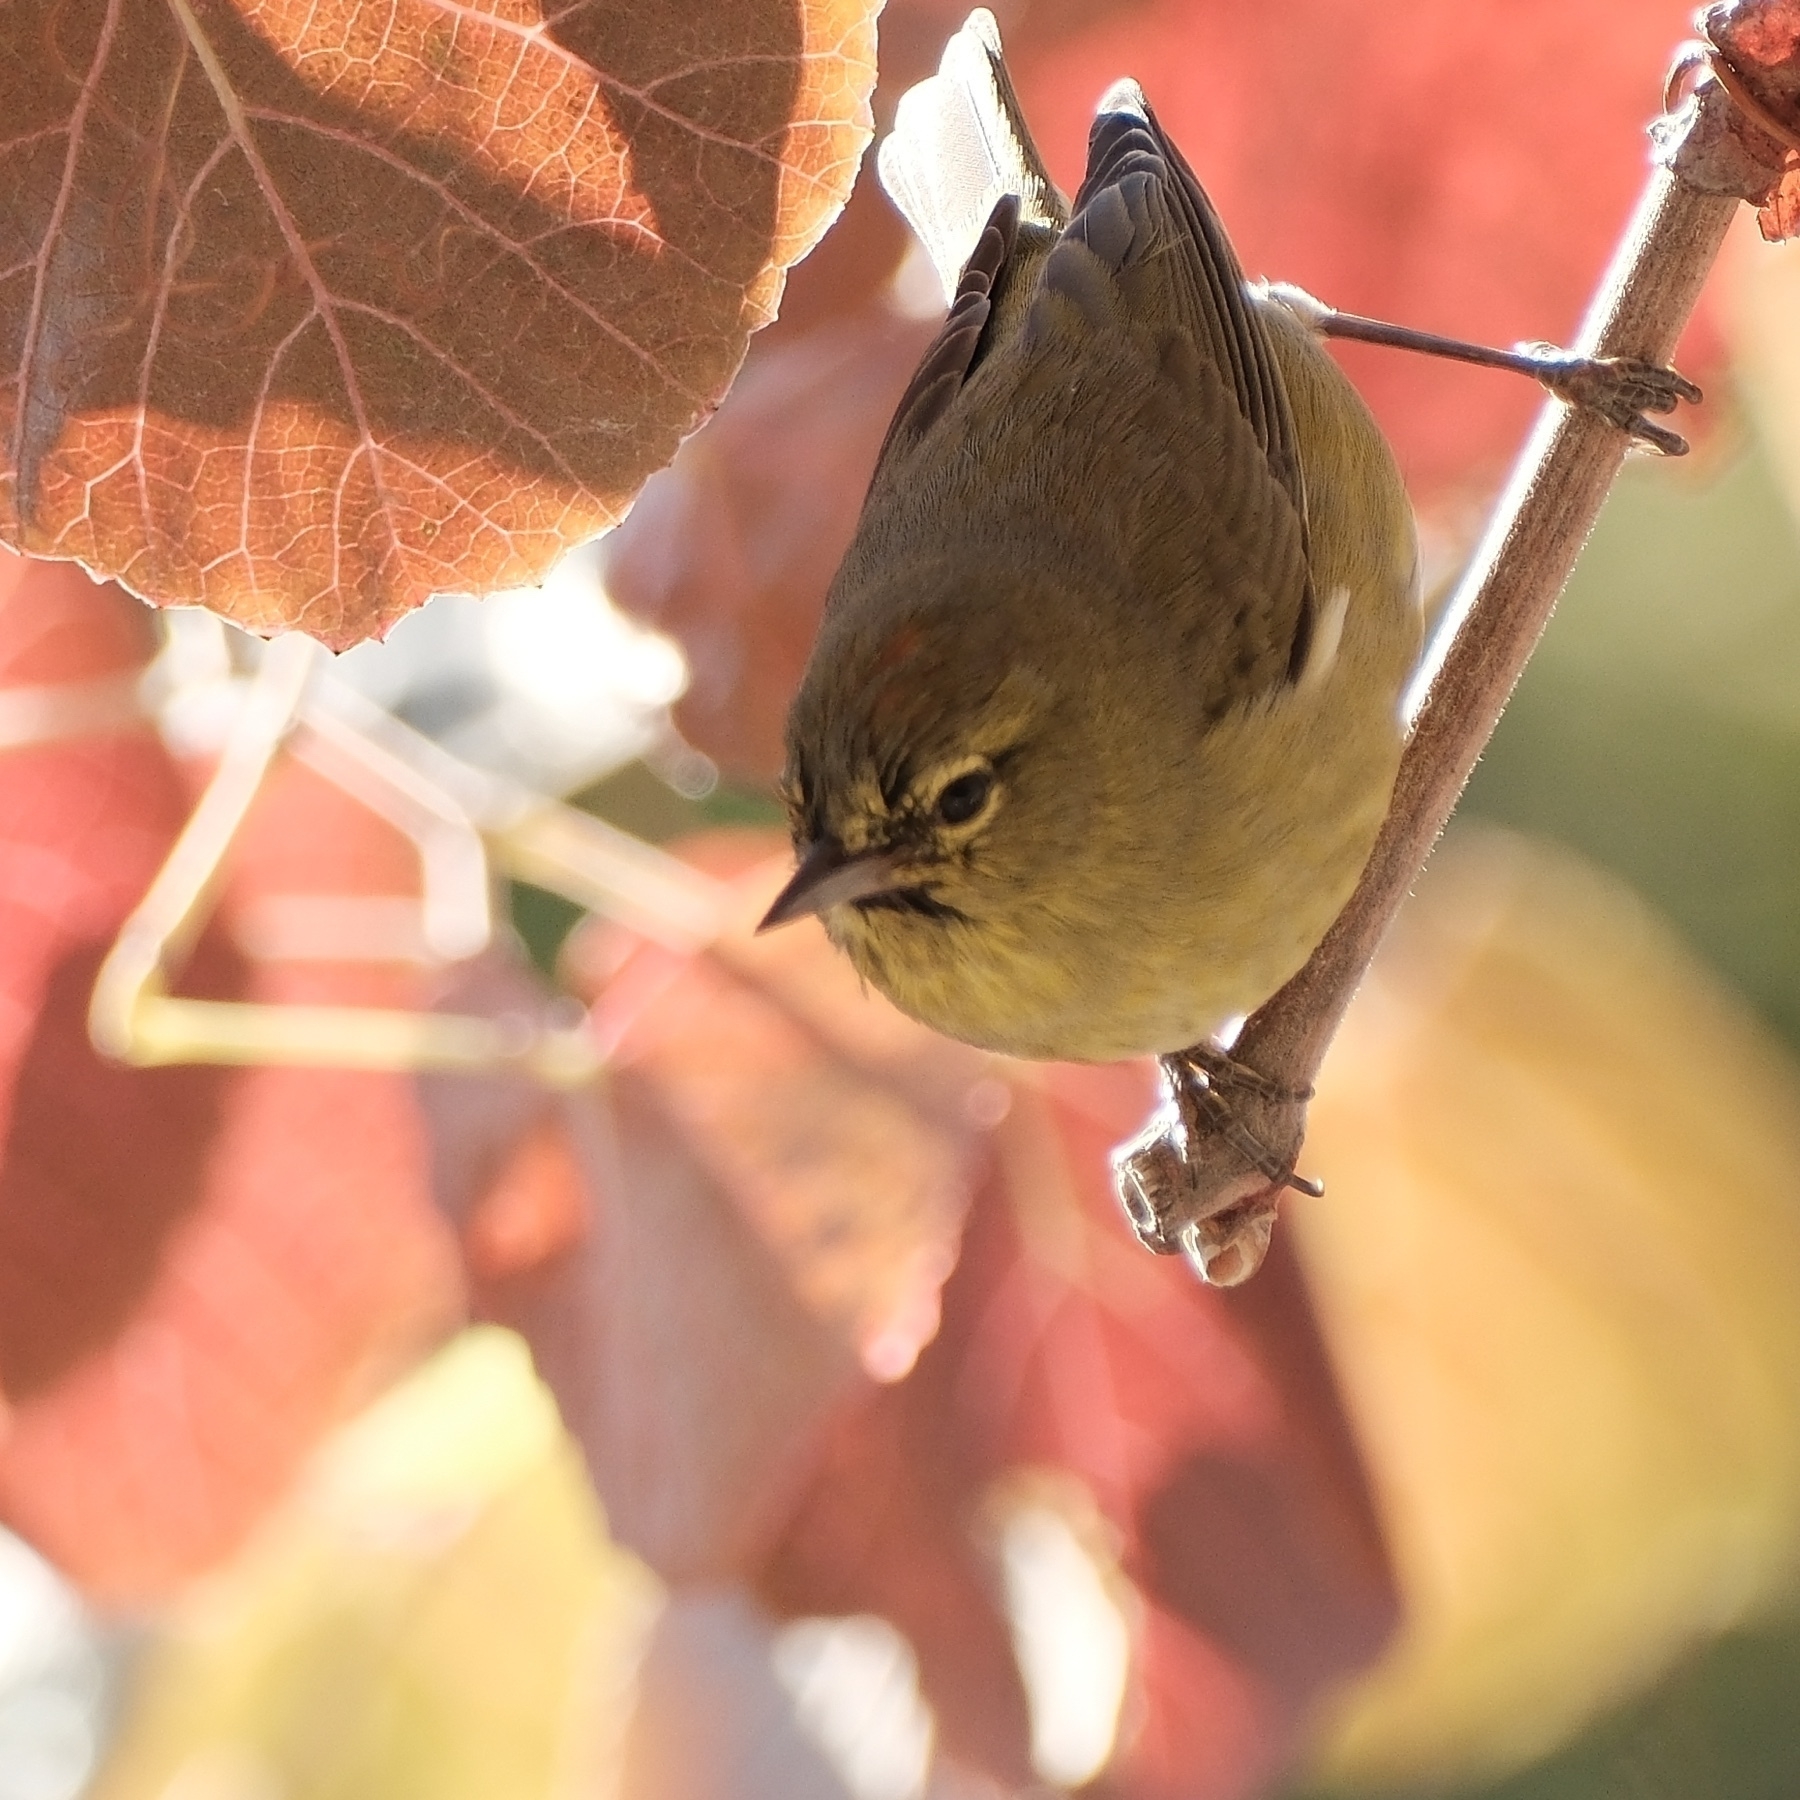 a yellowish bird with a ruby color patch on its head, perched on a grape vine